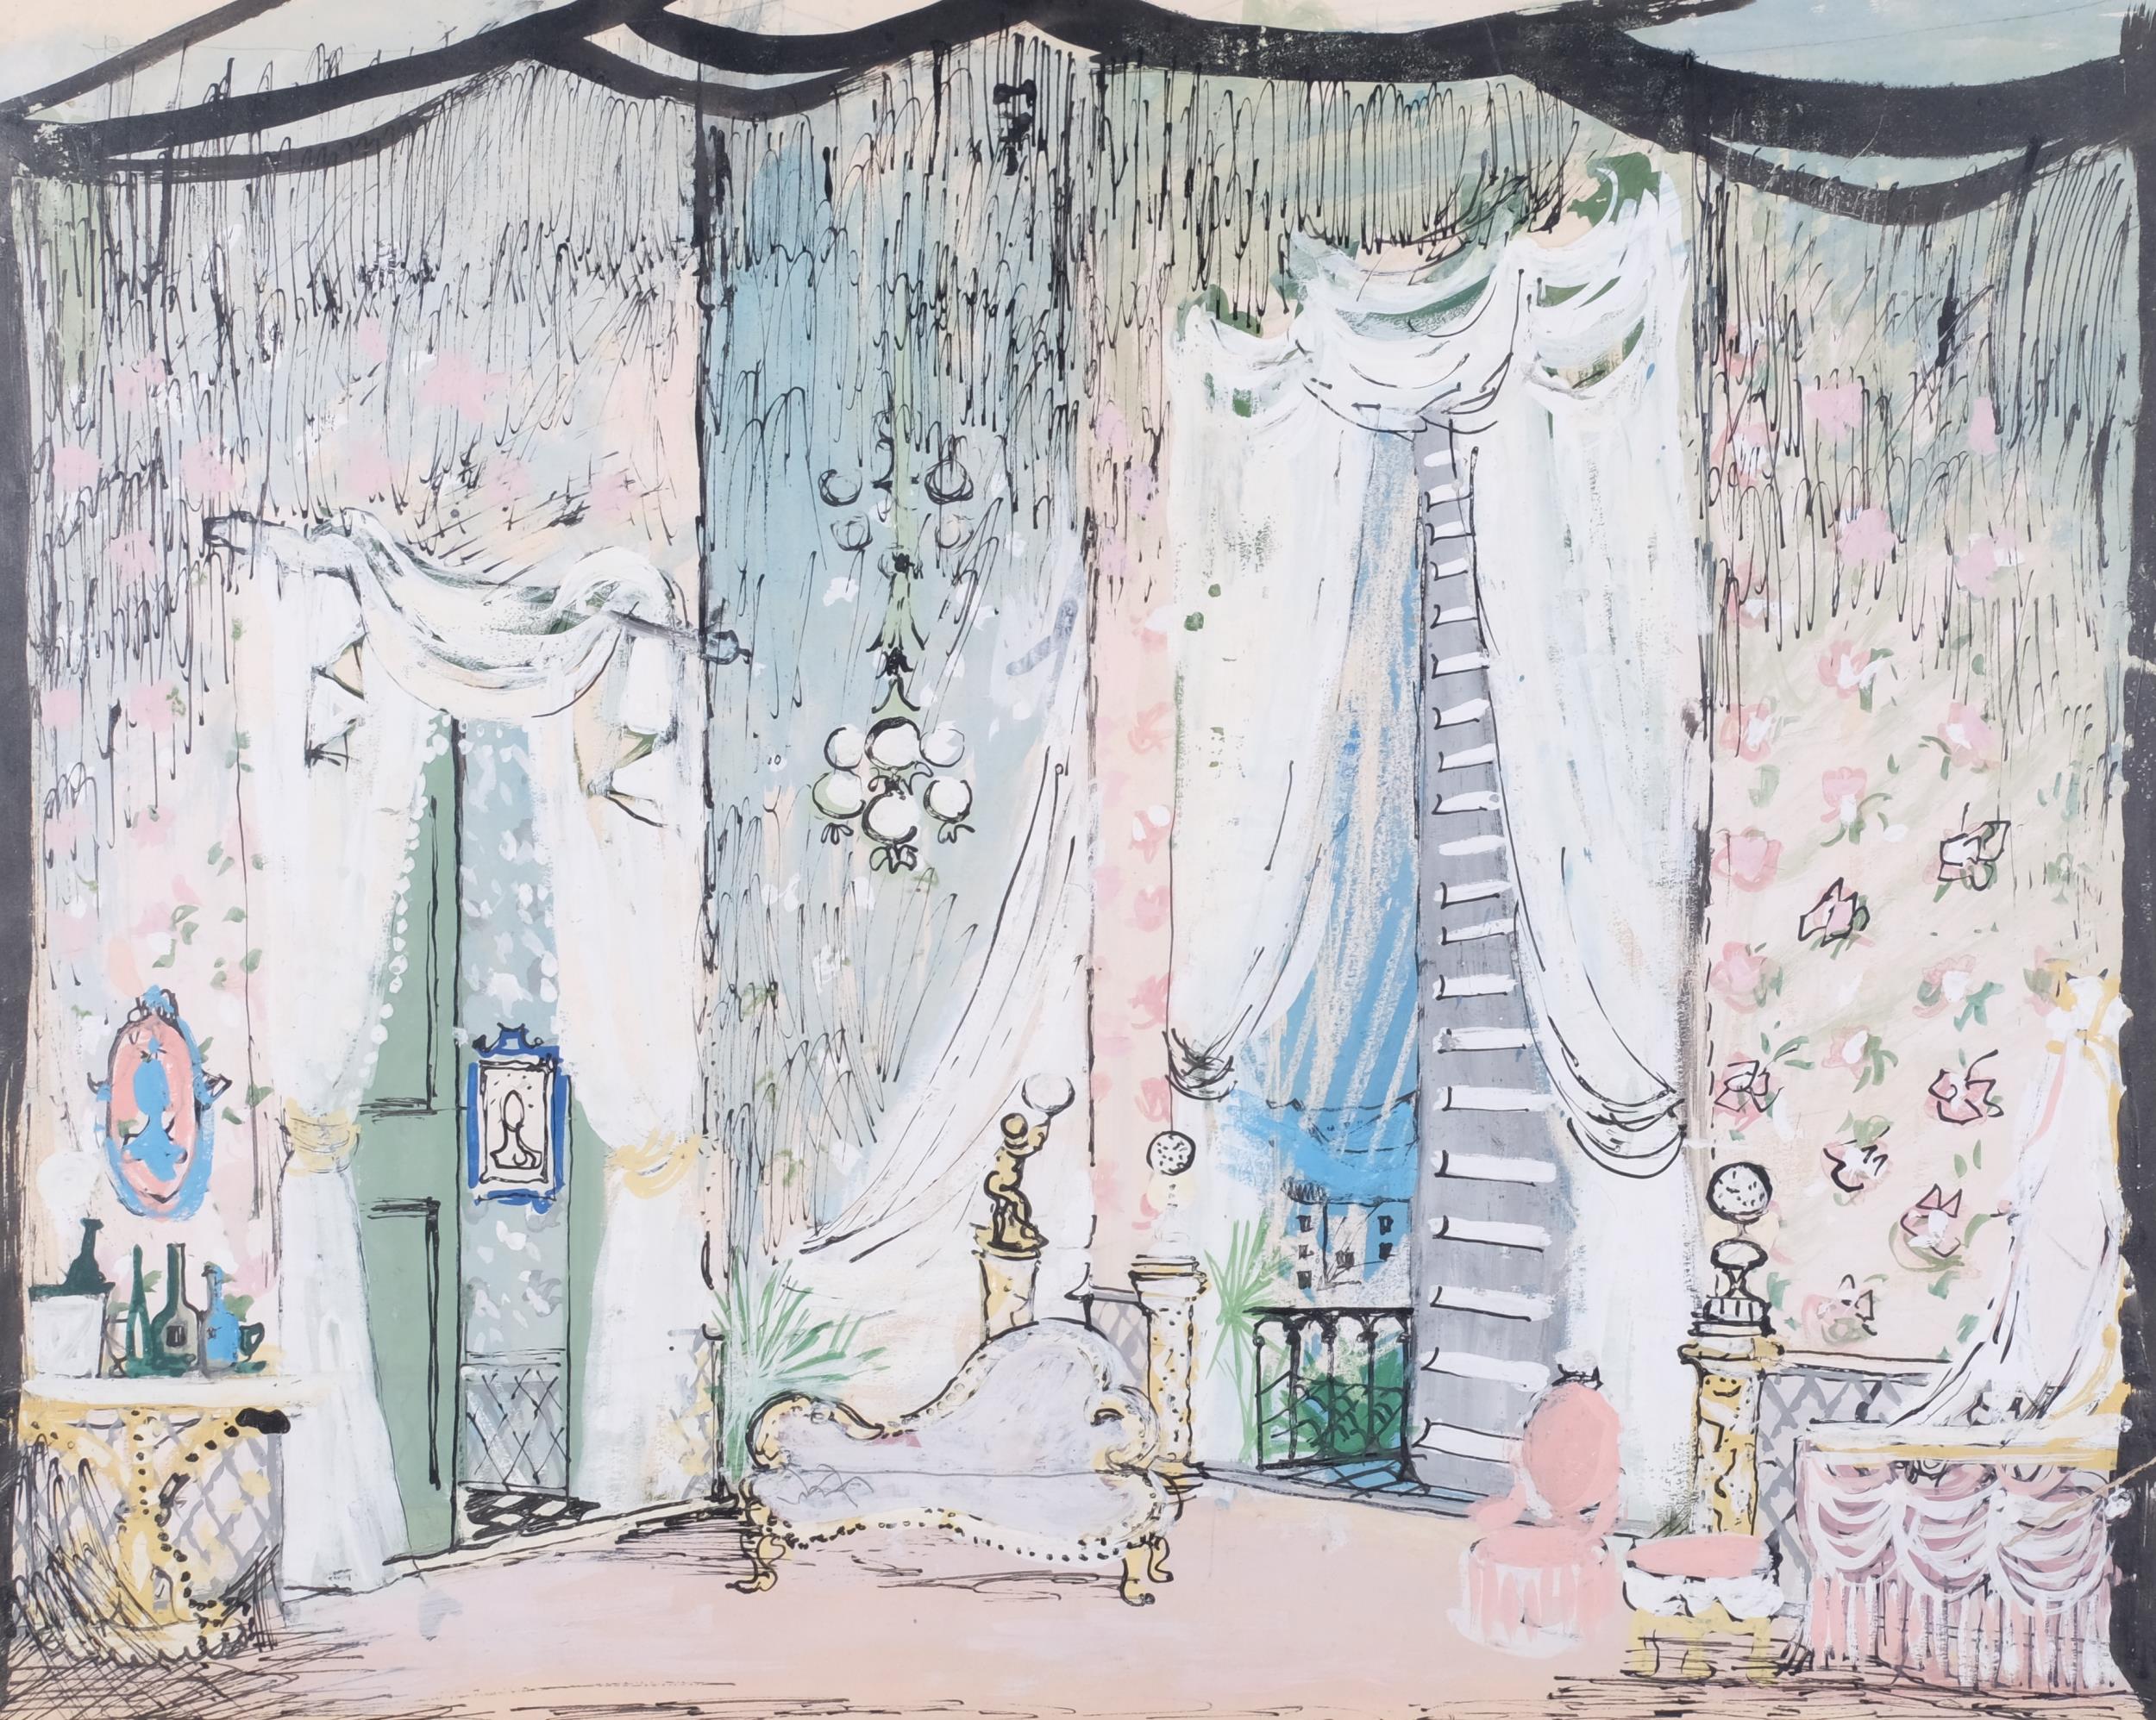 Richard Beer (1928 - 2017), stage set design, watercolour, 48cm x 60cm, framed Tear on right-hand